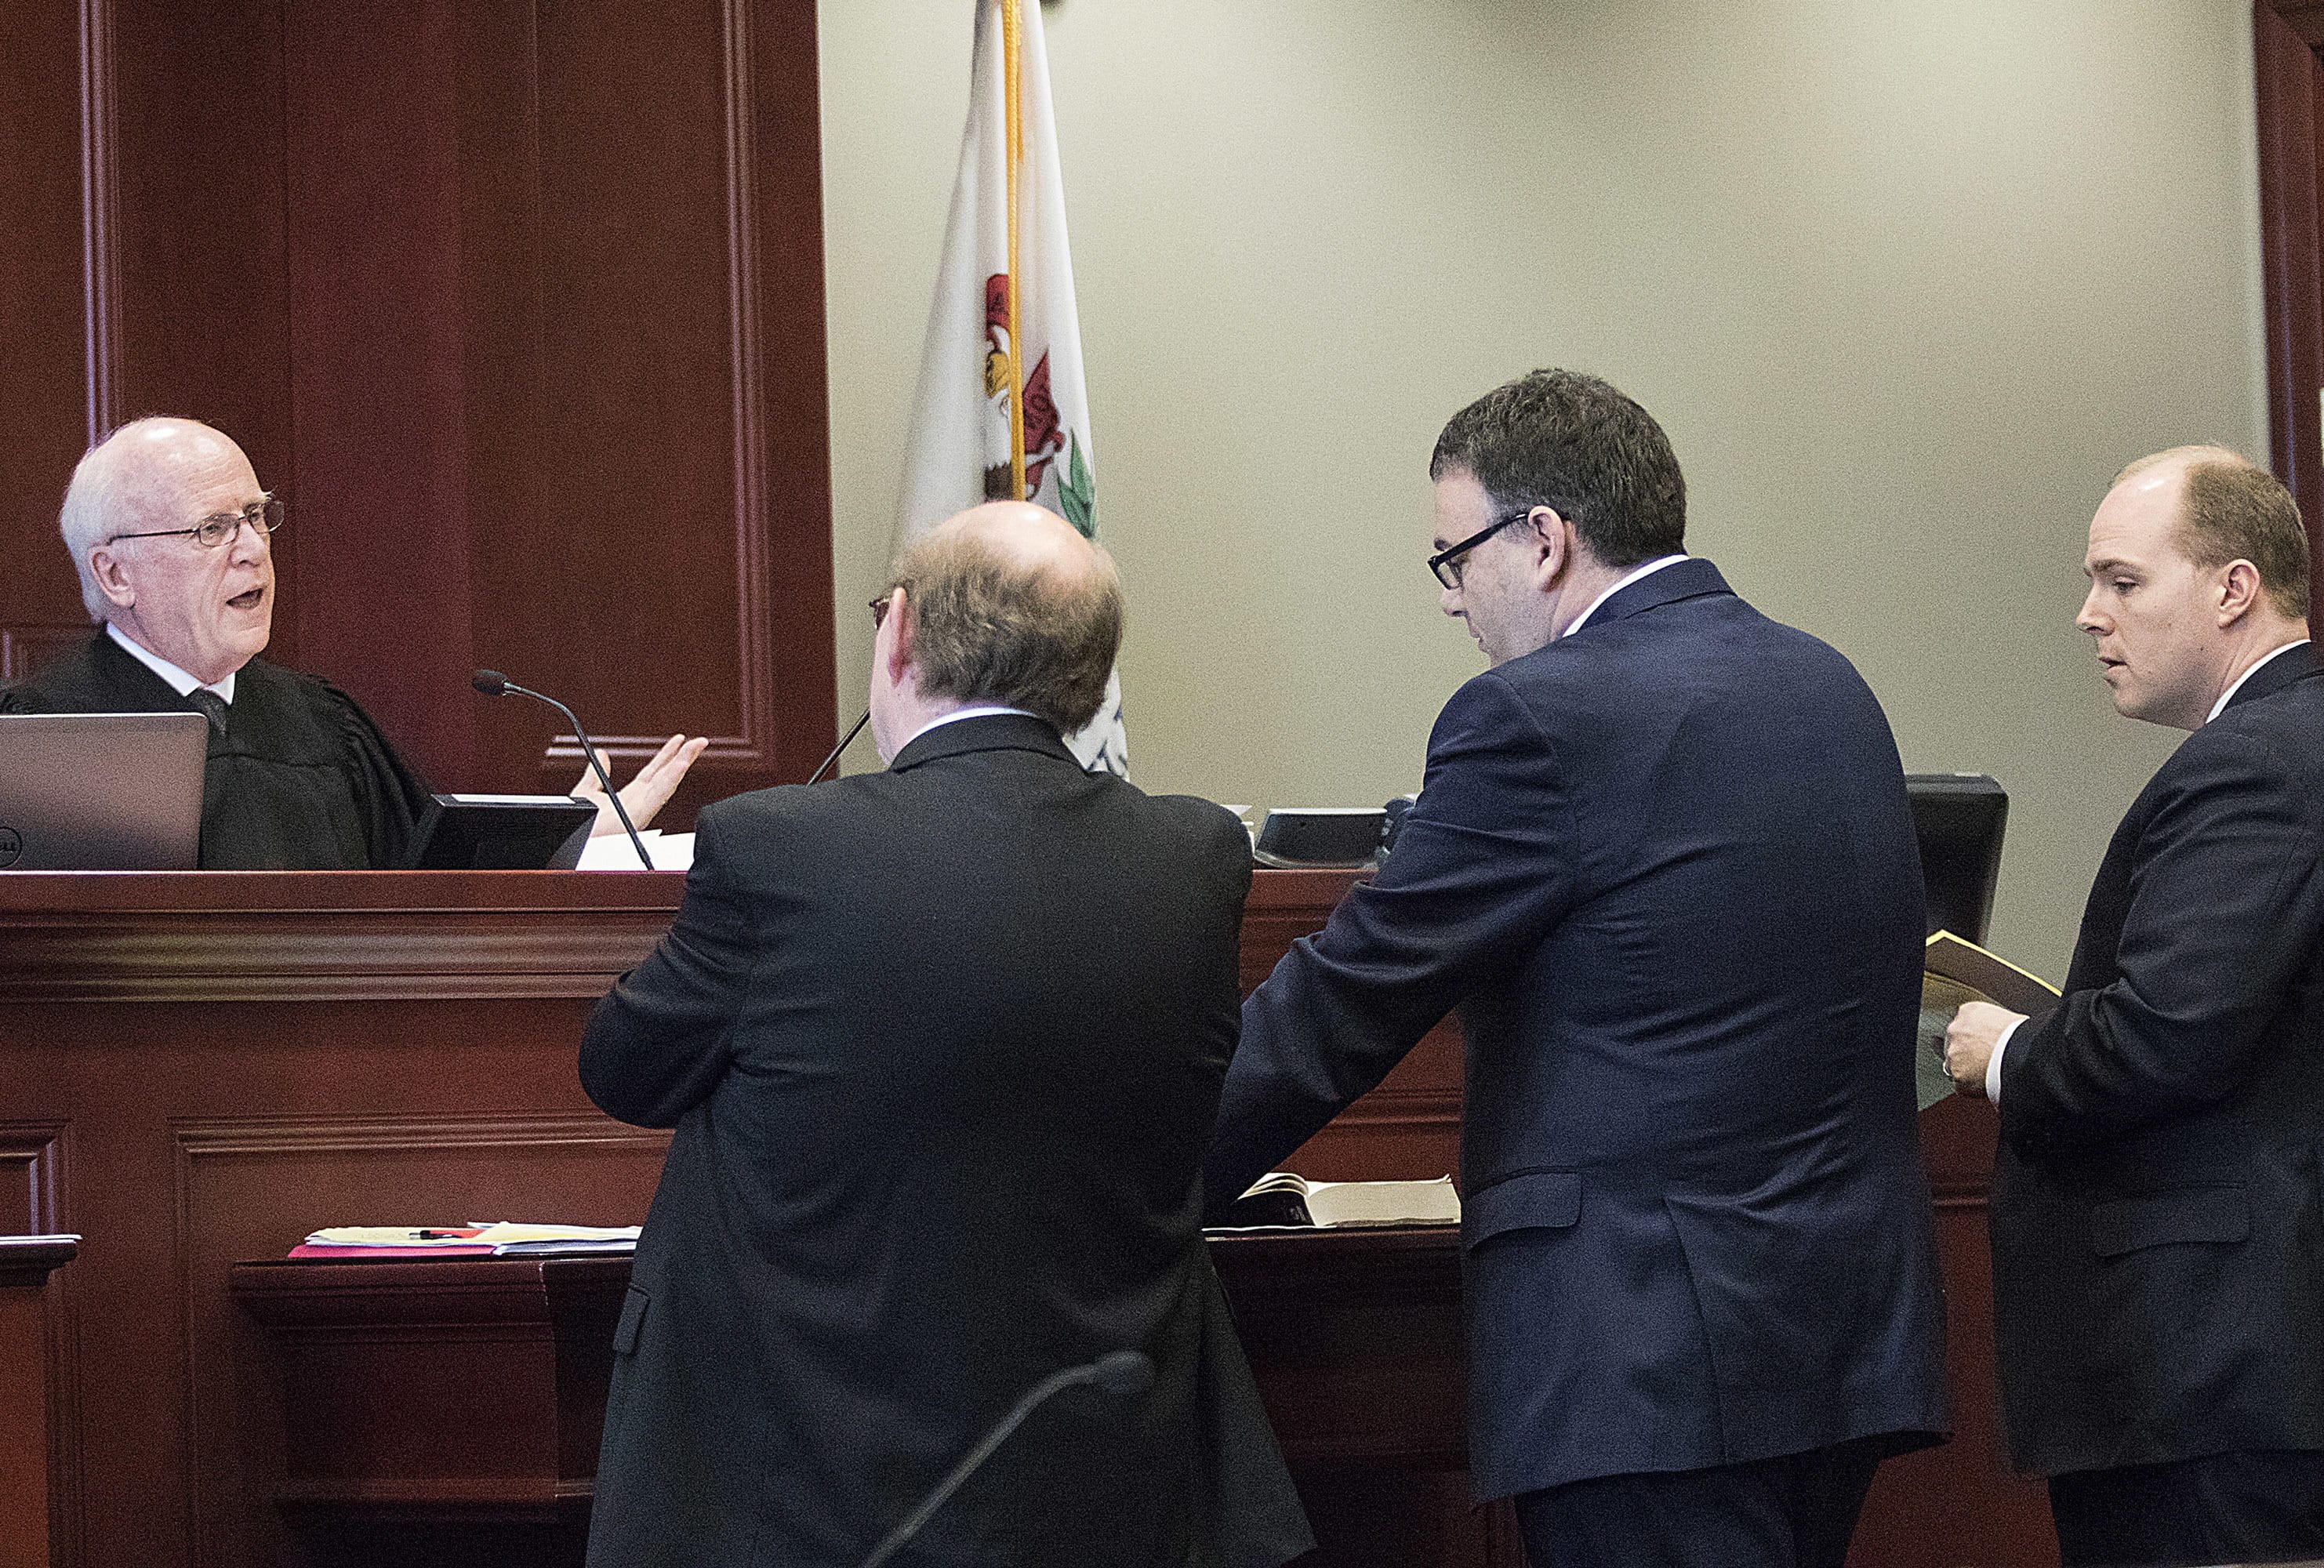 DeKalb County Judge William Brady, from left, speaks Friday to DeKalb County State&#039;s Attorney Richard Schmack and attorneys Gabriel Fuentes and Shaun Van Horn in Sycamore, Ill., after Fuentes and Van Horn filed a motion Thursday requesting Brady vacate their client Jack McCullough&#039;s murder conviction or release him on bond. McCullough was convicted in 2012 for the 1957 killing of 7-year-old Maria Ridulph, of Sycamore.